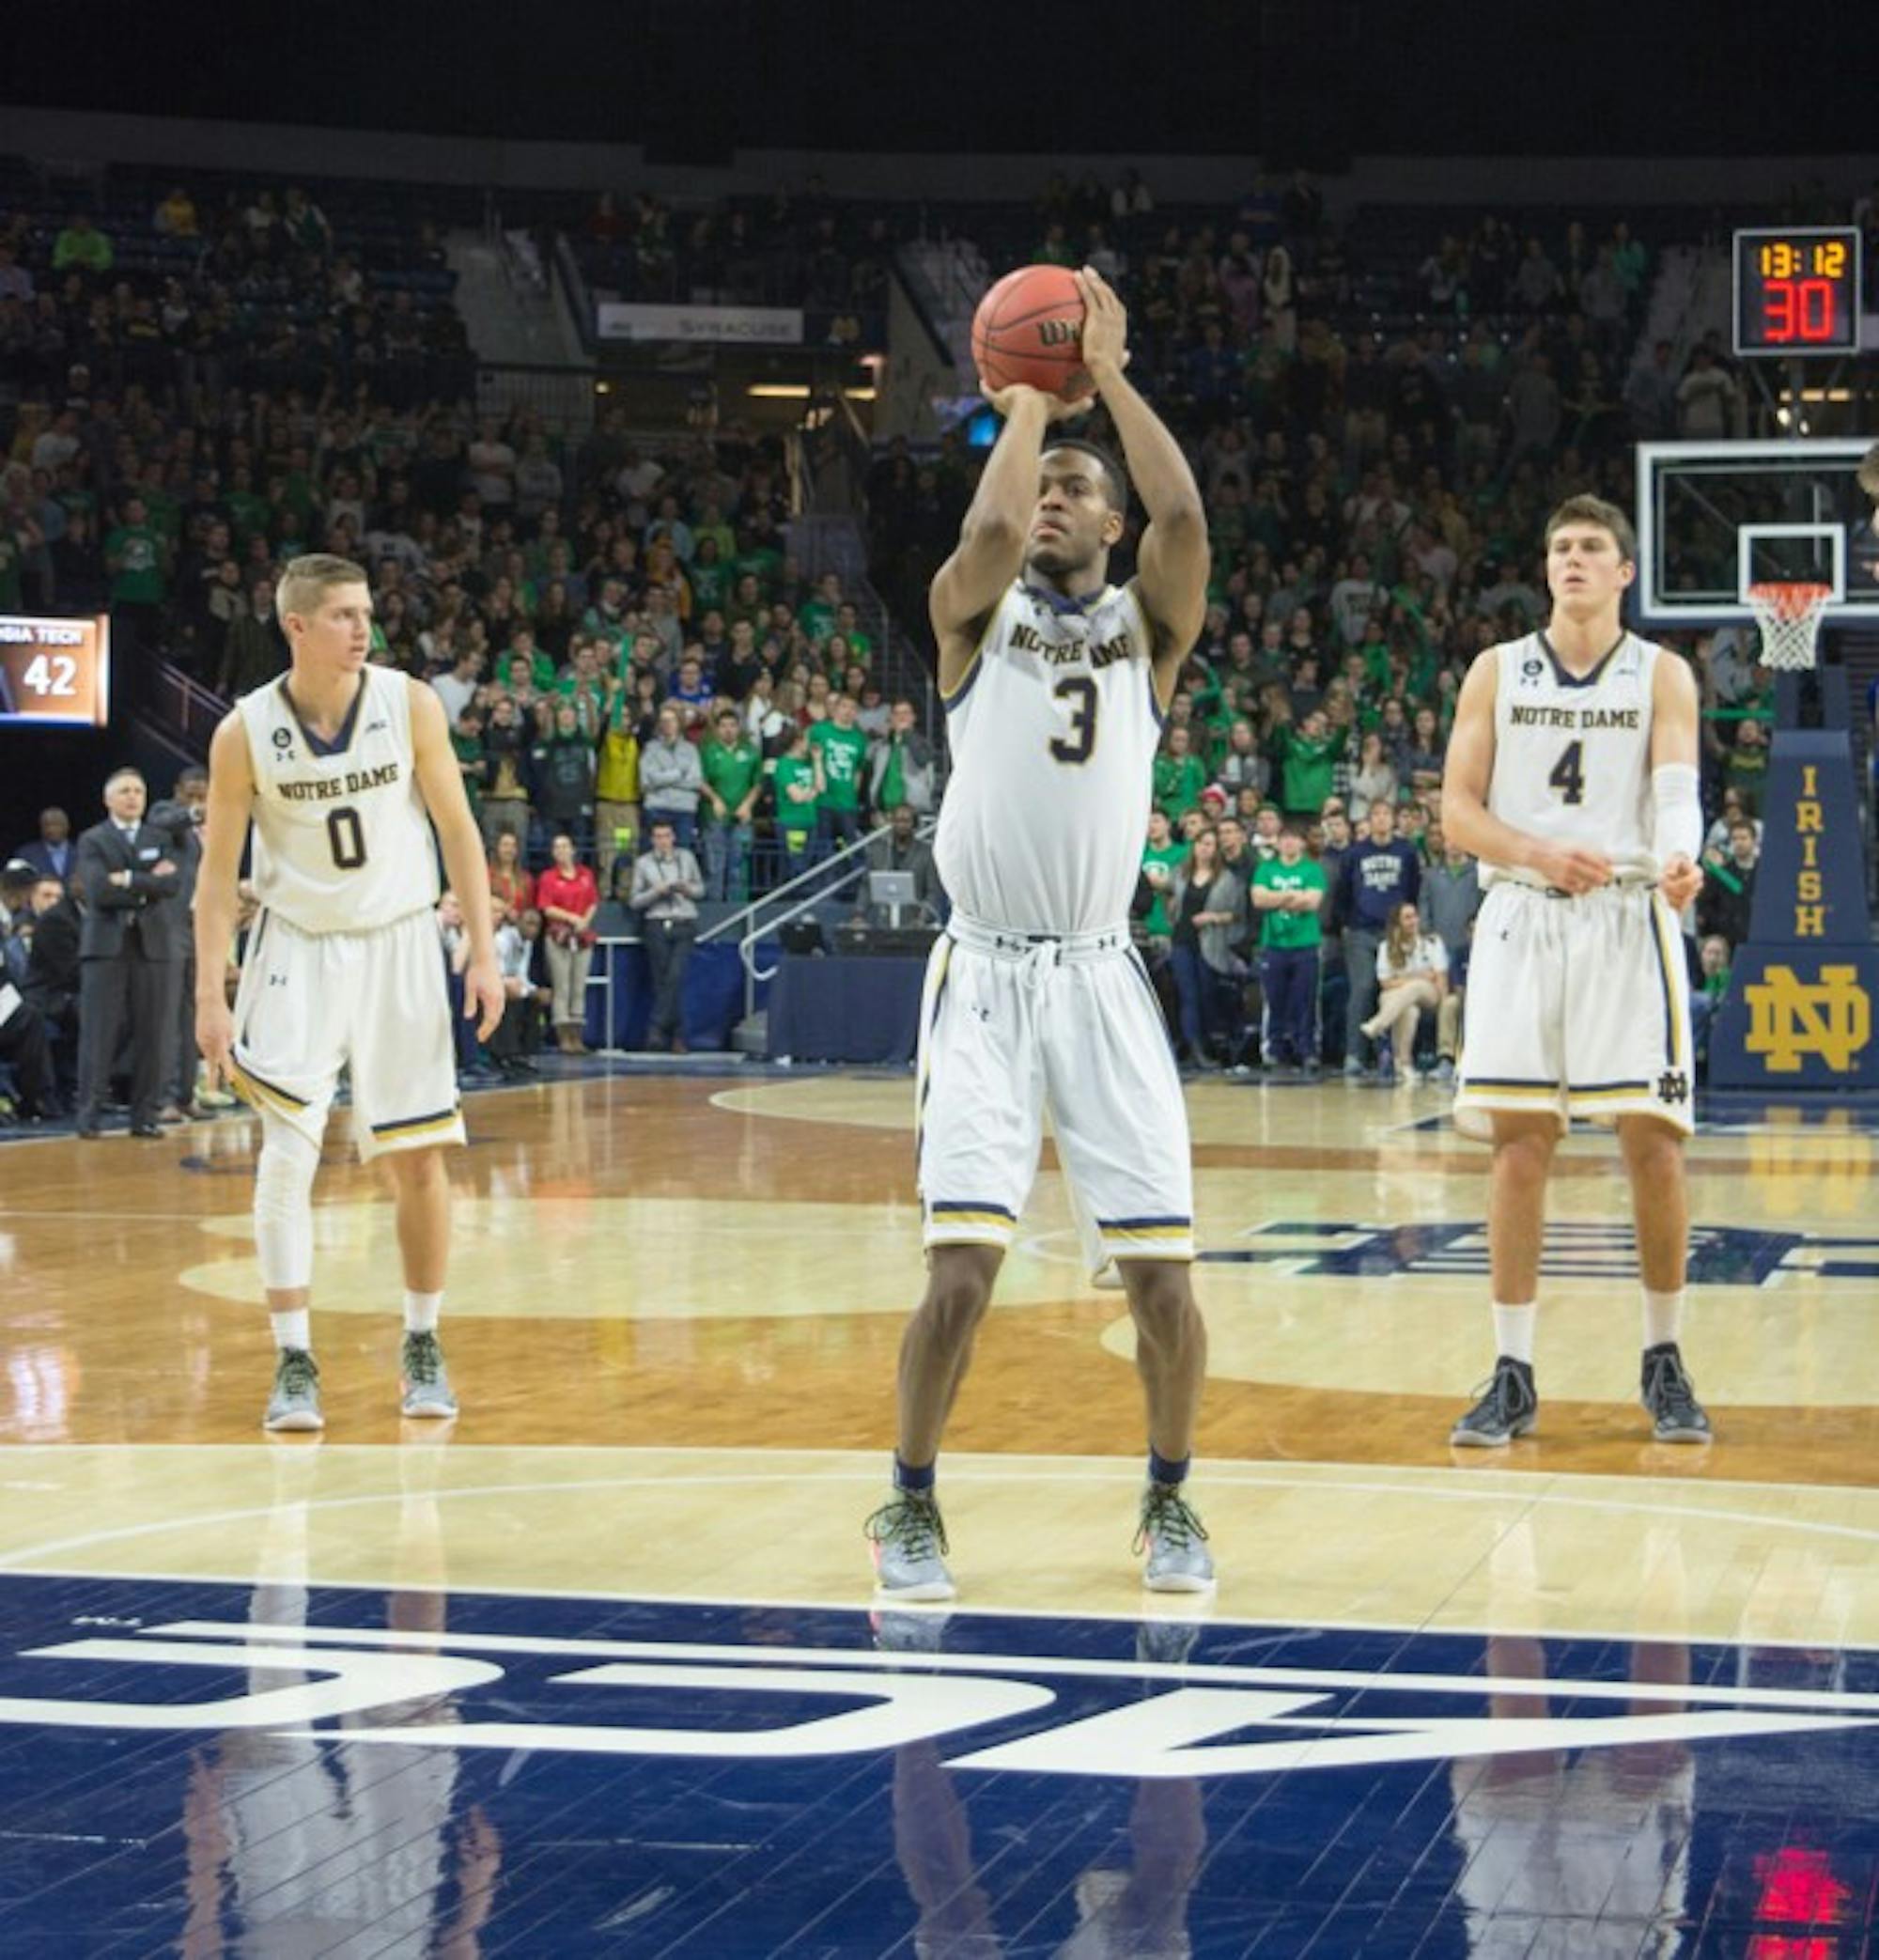 Irish junior forward V.J Beachem shoots a free throw during Notre Dame’s 72-65 win over Georgia Tech on Jan. 13 at Purcell Pavilion. Beachem scored six points, including a three-pointer for the Irish.